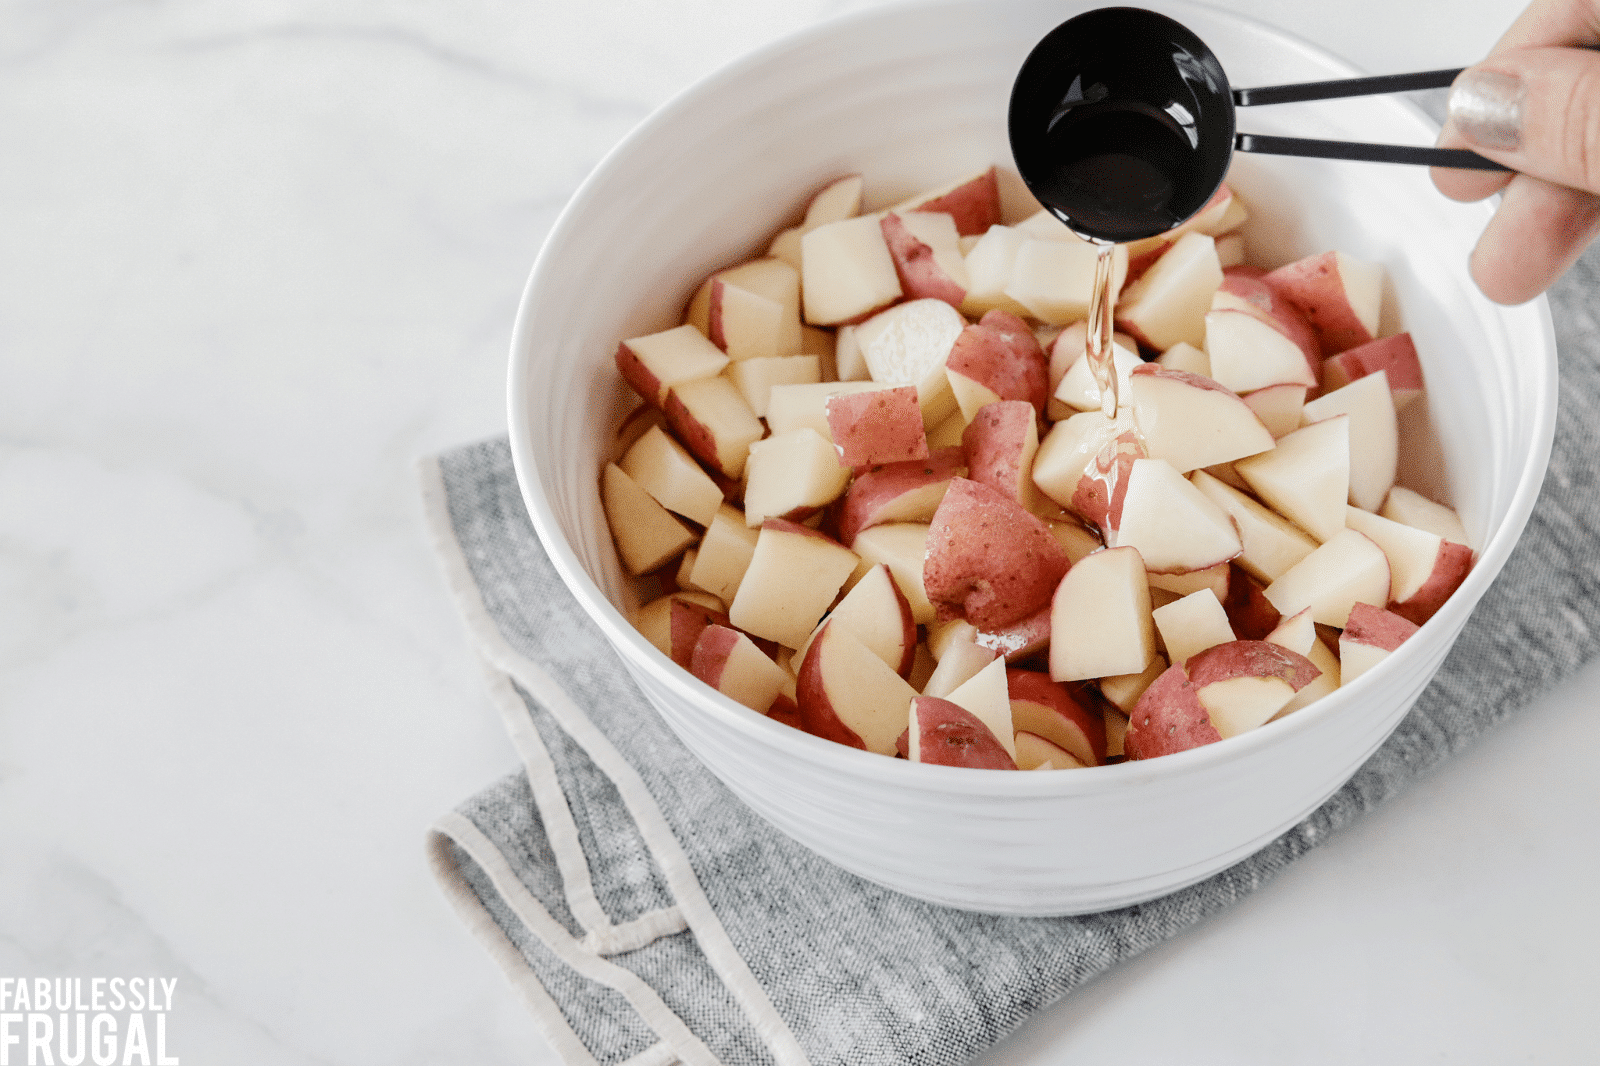 Bowl of red potatoes